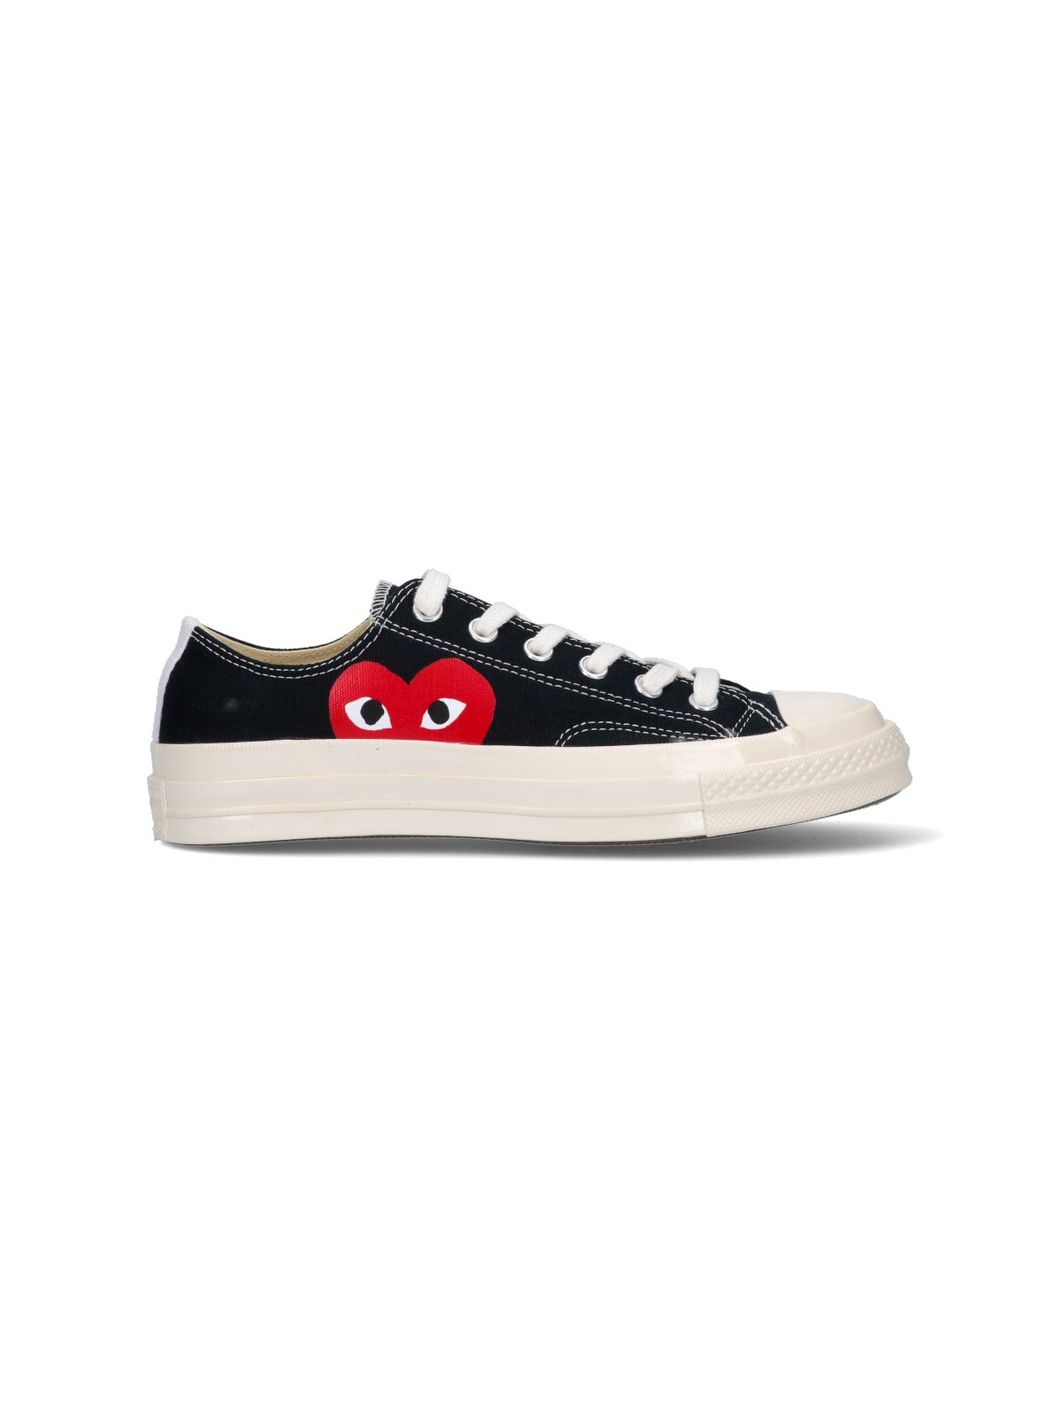 Comme Des Garcons Play "Converse Chuck 70" Low Top Sneakers